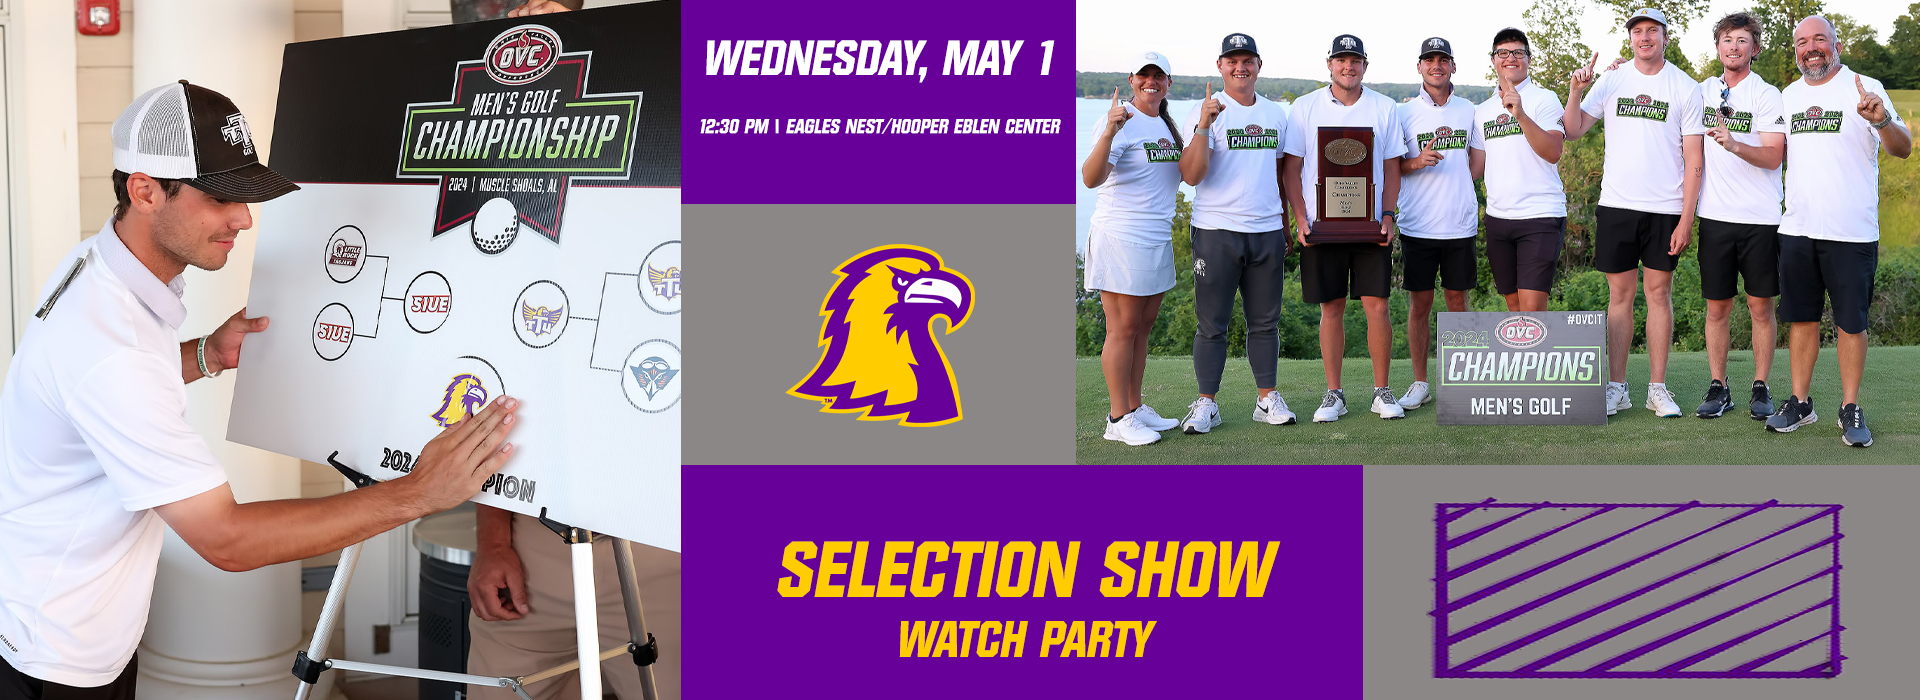 Tech Athletics to host NCAA men's golf selection show viewing party Wednesday, May 1